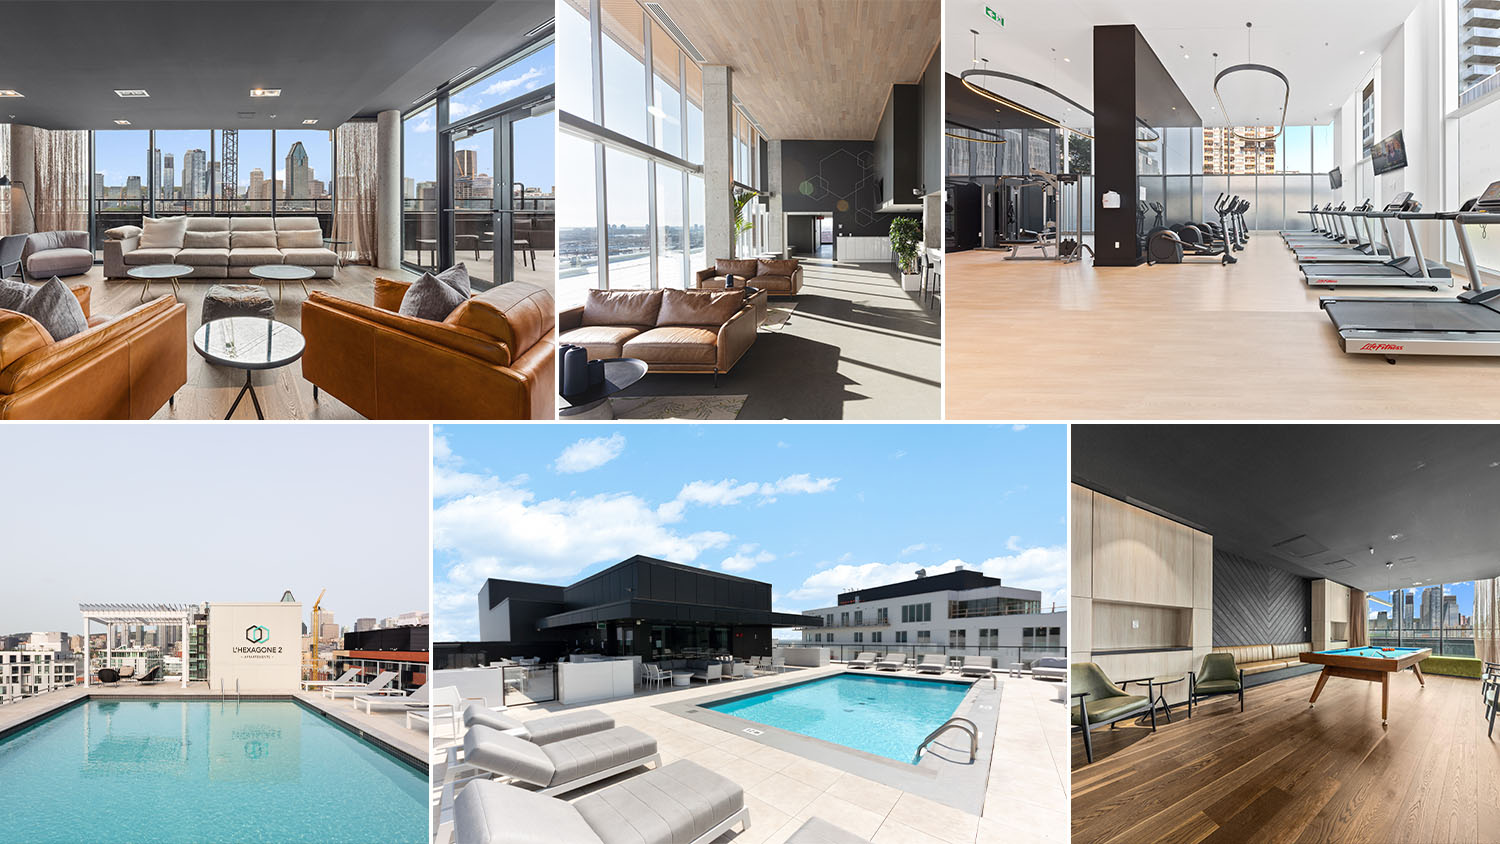 Turning the spotlight on the common areas of Devimco Immo-bilier's rental projects